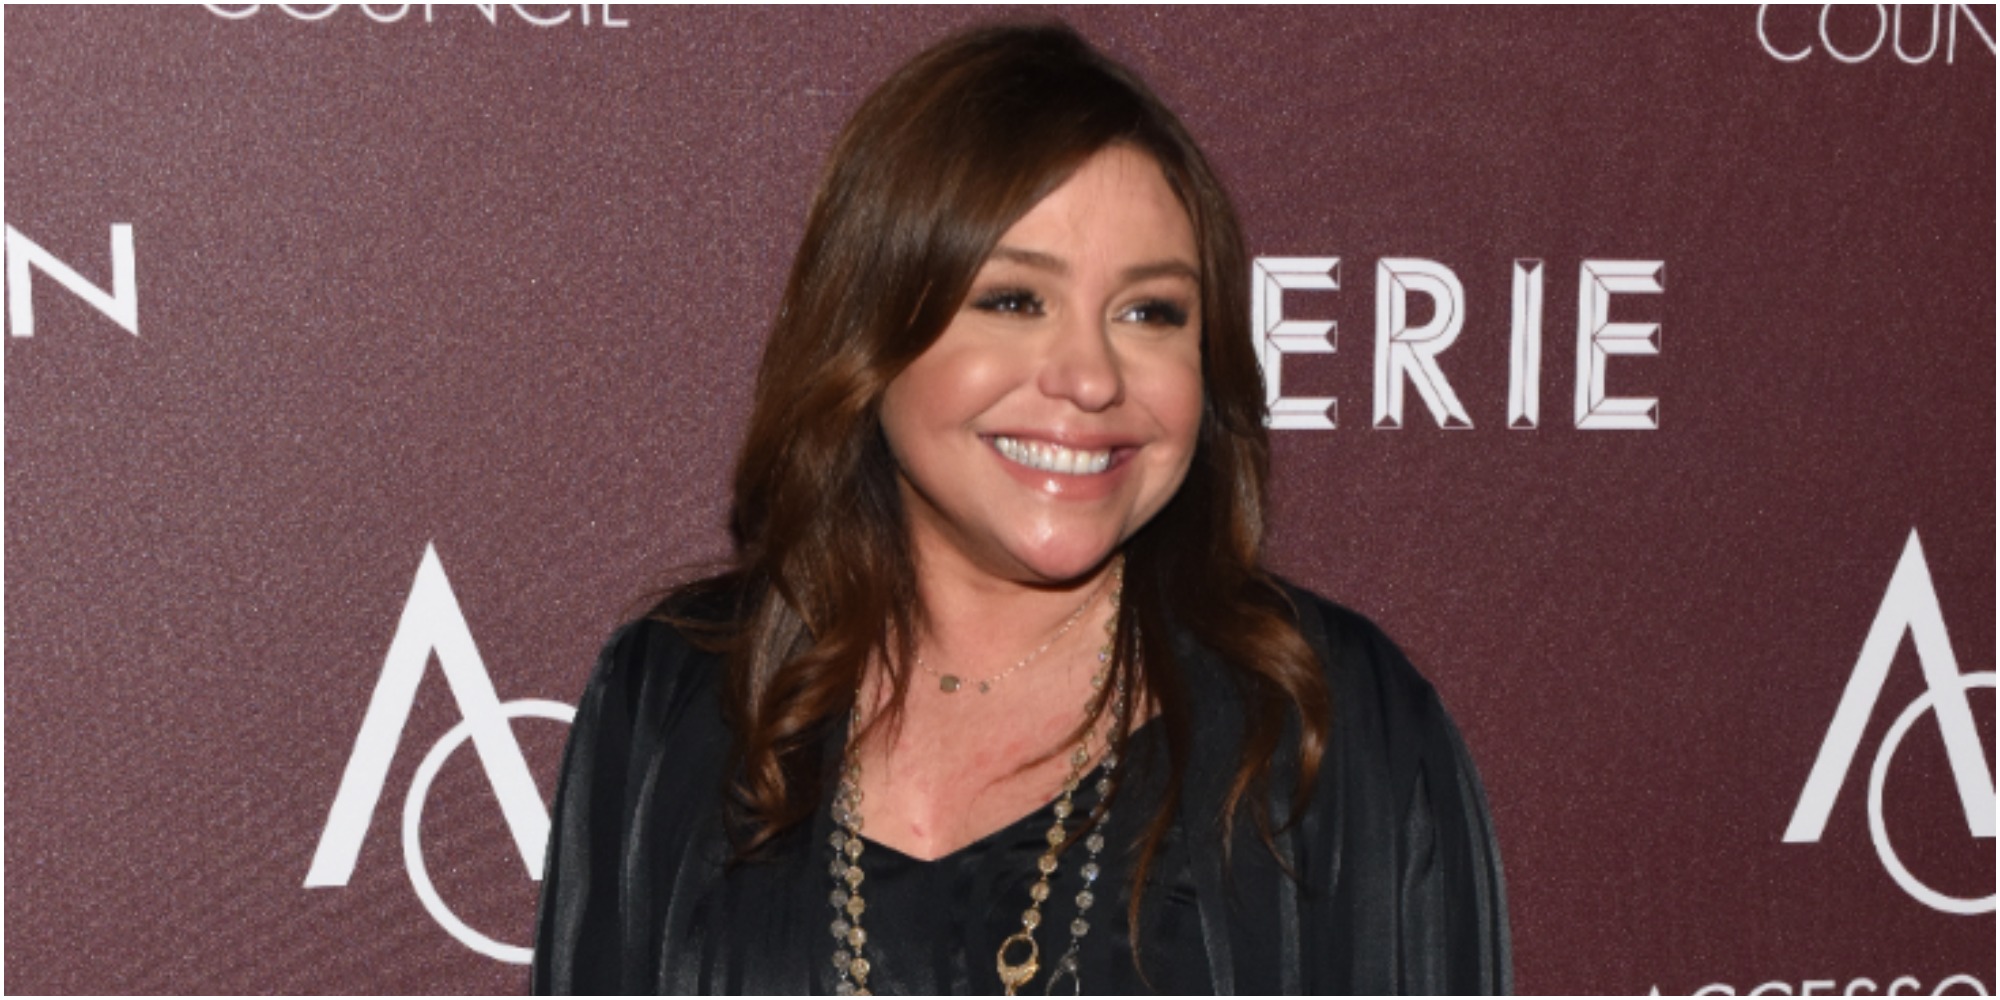 Rachael Ray poses on the red carpet at a celebrity event.